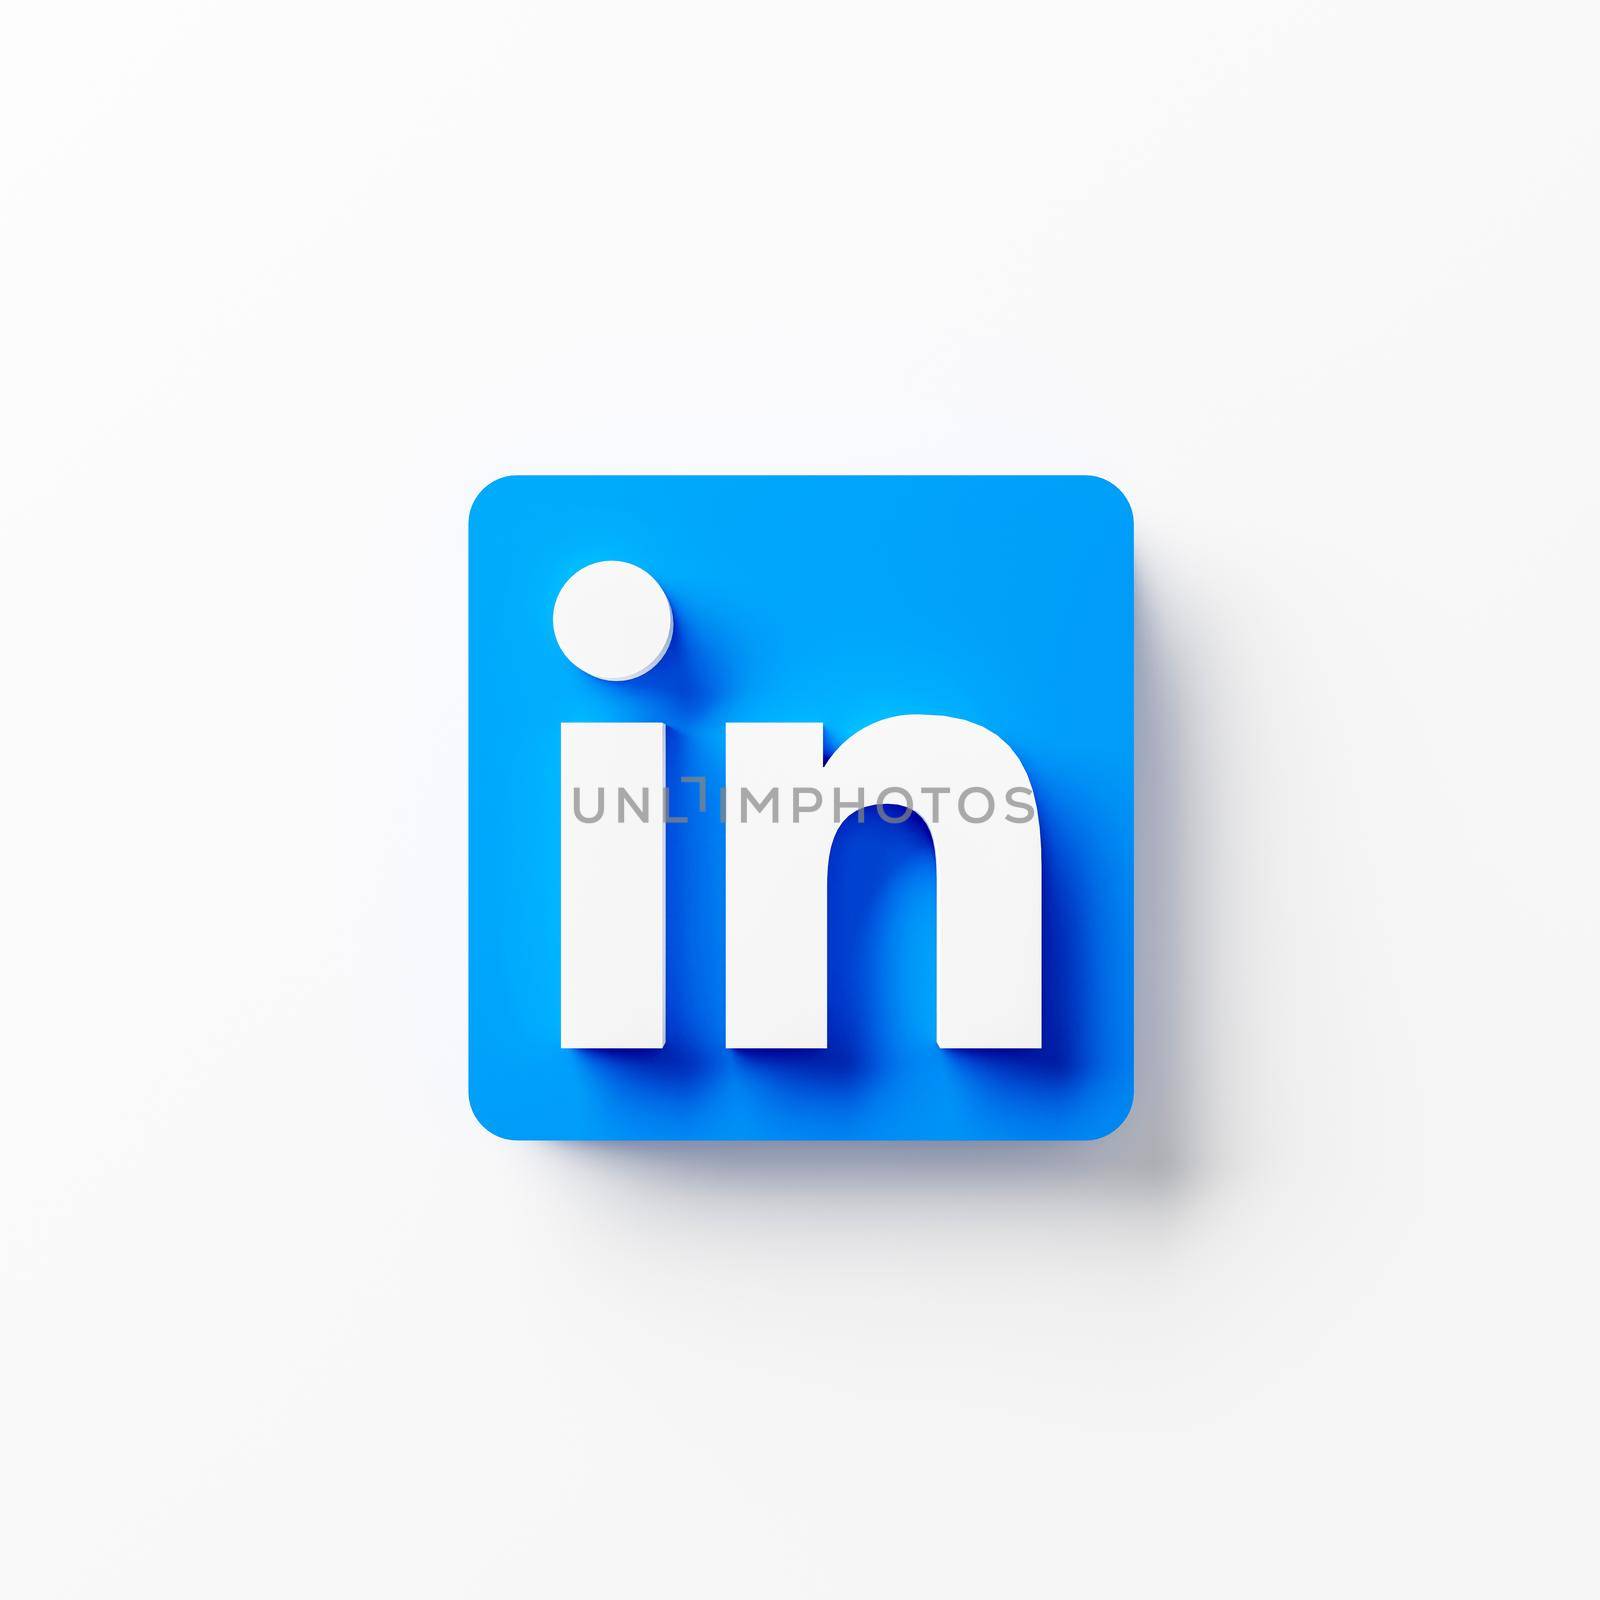 Chonburi, Thailand - JUN 03 , 2021: A close up LinkedIn logo icon on white background. American business and employment-oriented online service via website and mobile app. 3D illustration rendering